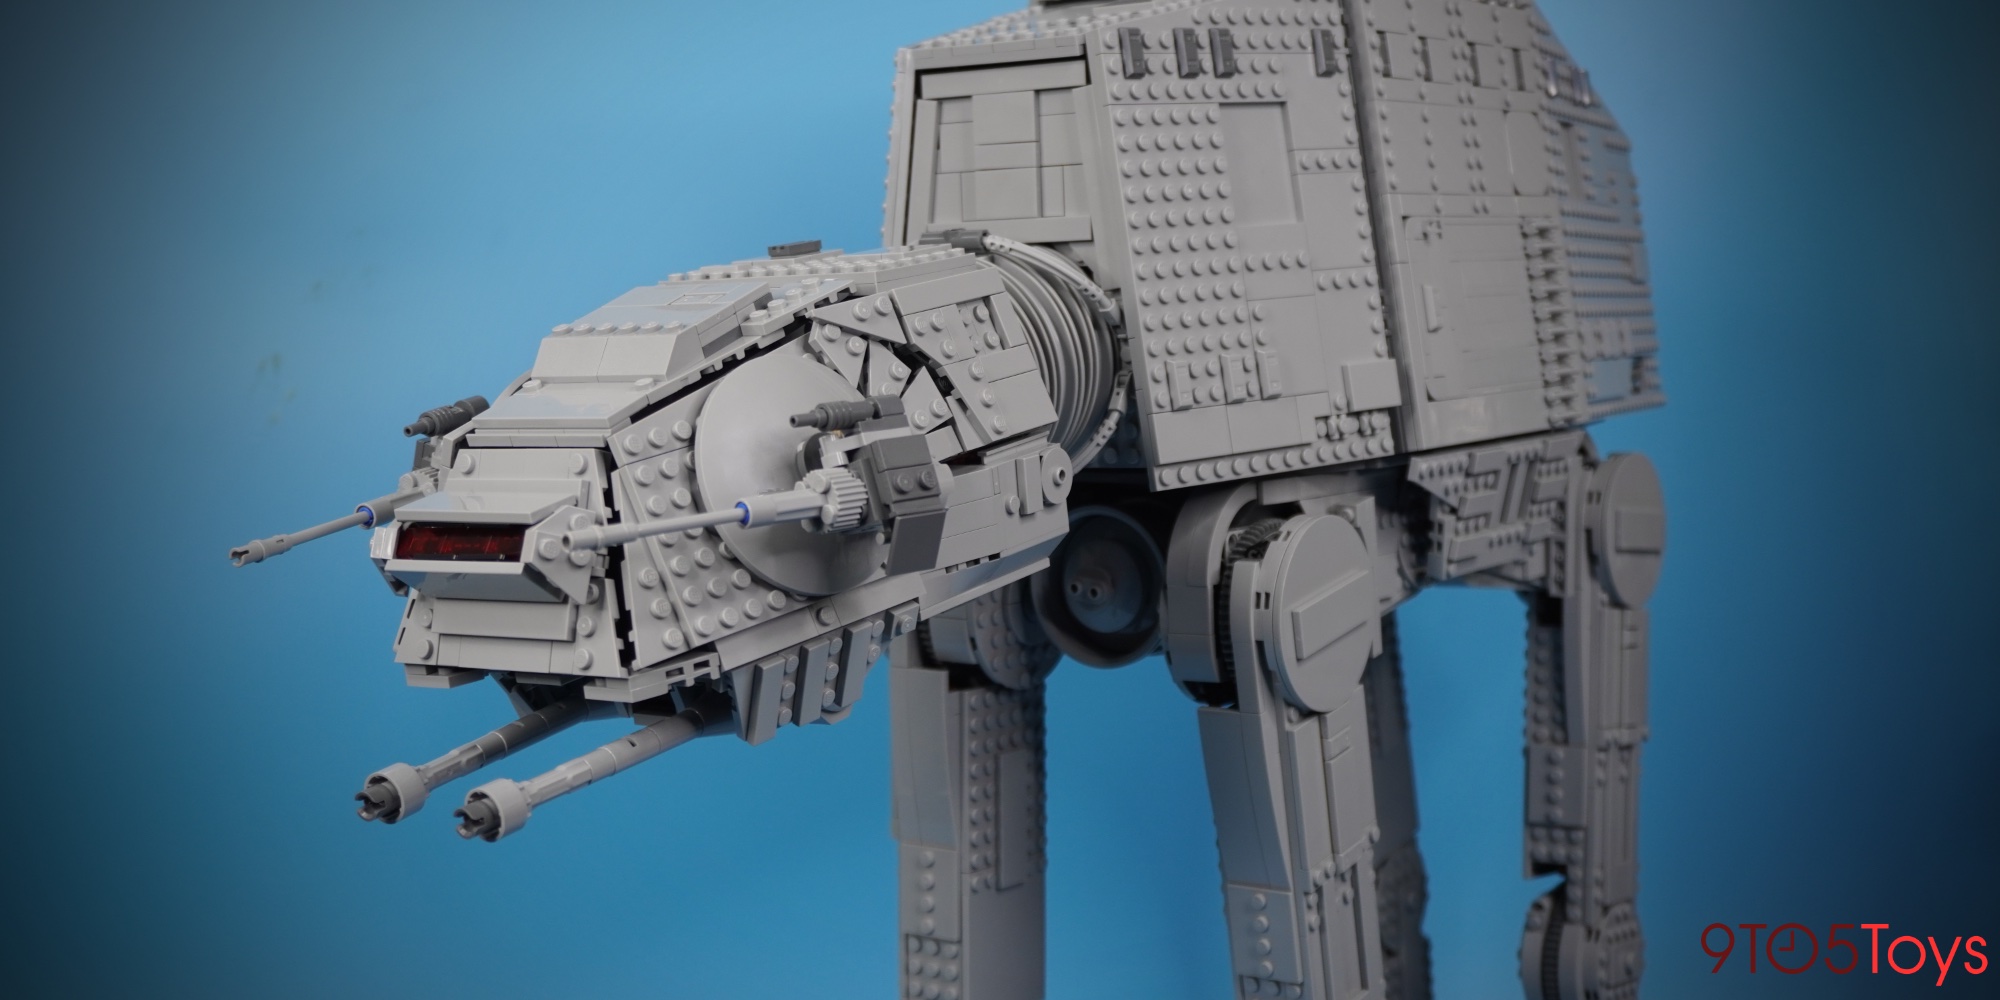 Kanin trofast Relaterede LEGO UCS AT-AT review: Hands-on with the 6,800-piece set - 9to5Toys